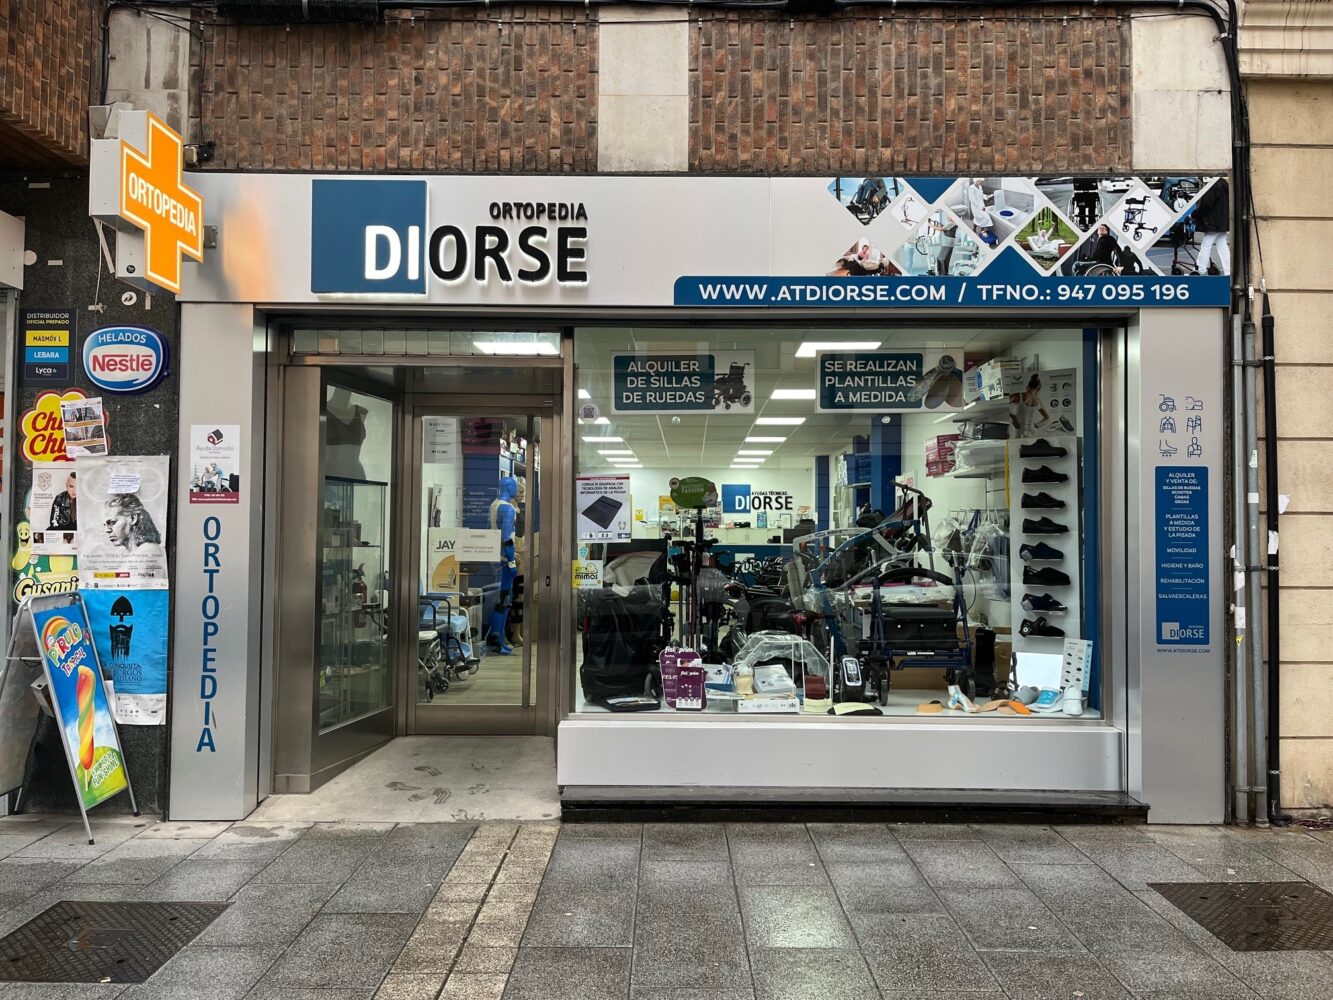 Diorse, official service of Batec Mobility in Burgos